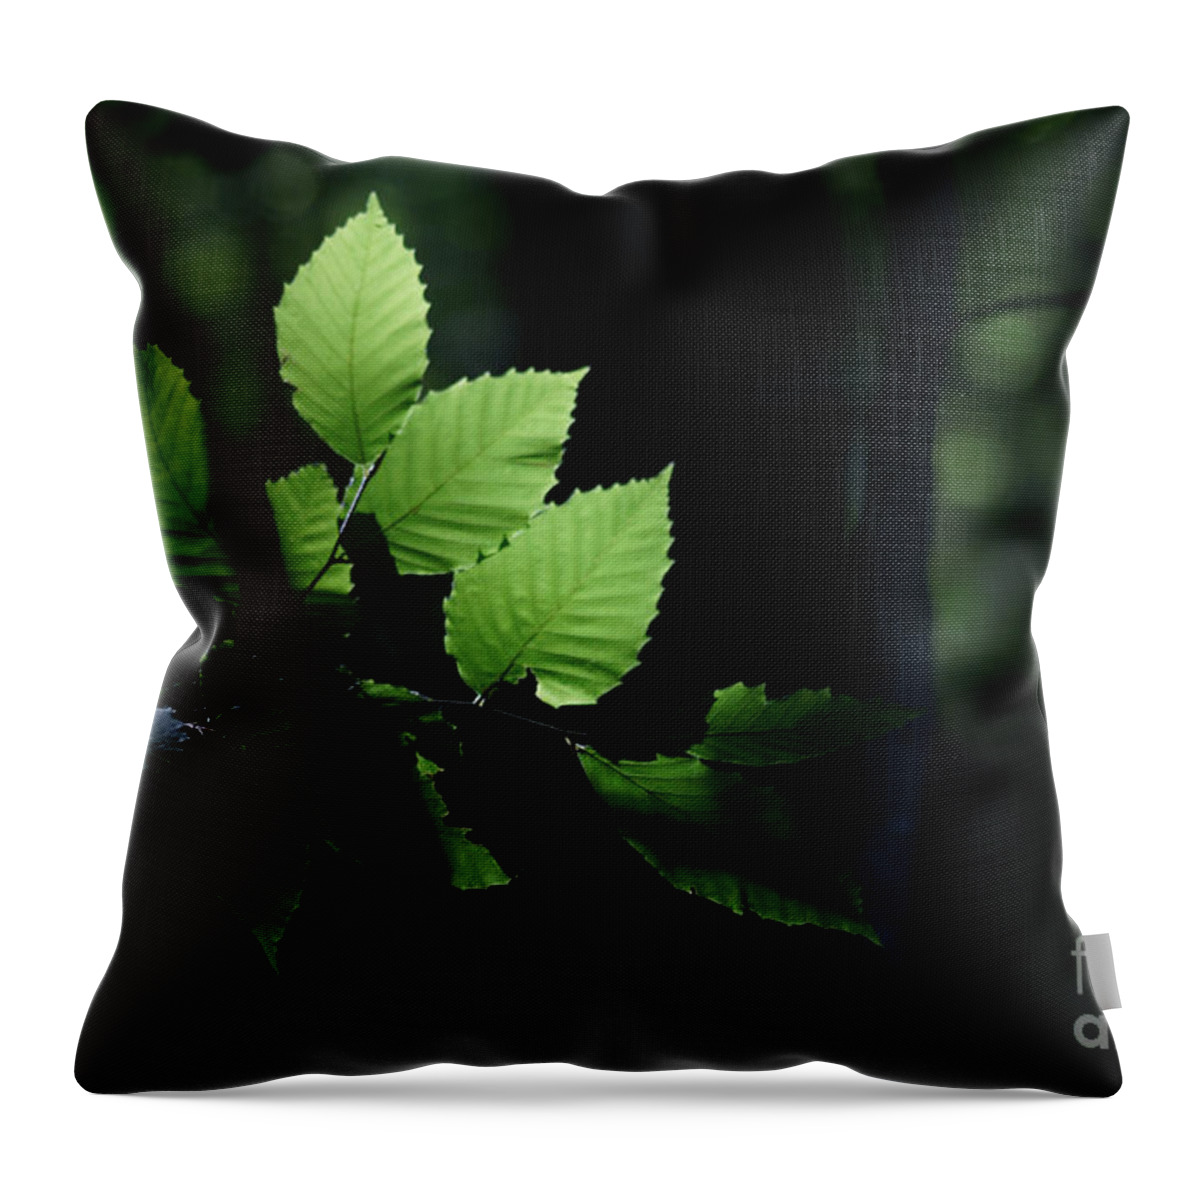 Forest Throw Pillow featuring the photograph Mute And Motionless As If Himself A Shadow by Linda Shafer